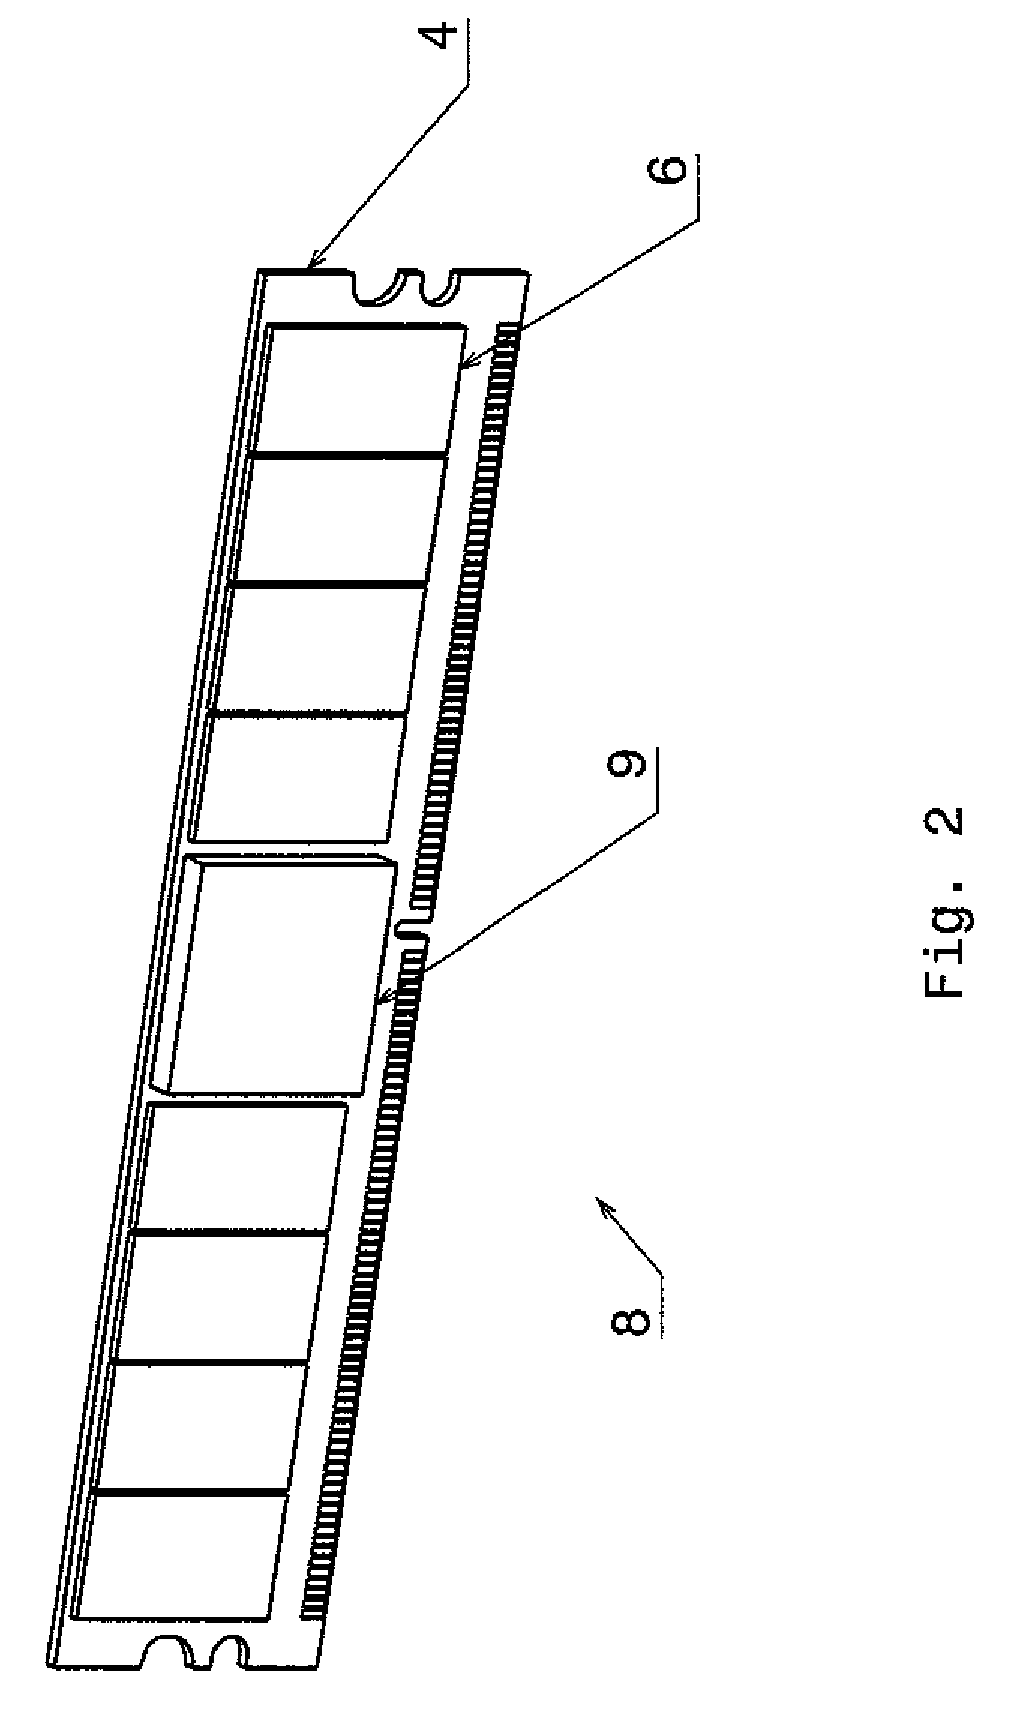 Method and apparatus of water cooling several parallel circuit cards each containing several chip packages